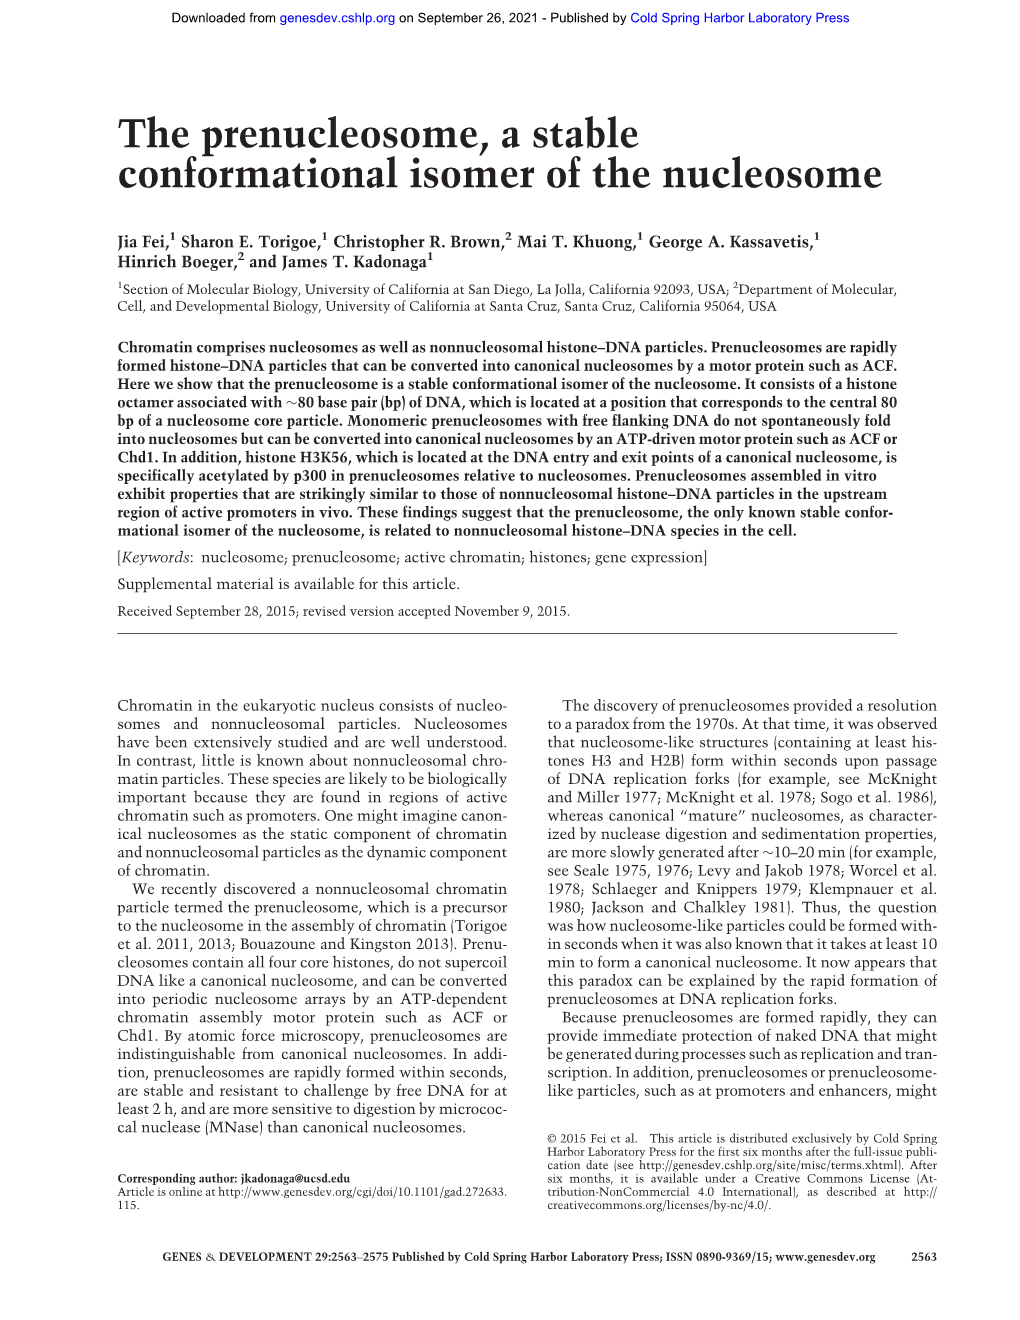 The Prenucleosome, a Stable Conformational Isomer of the Nucleosome